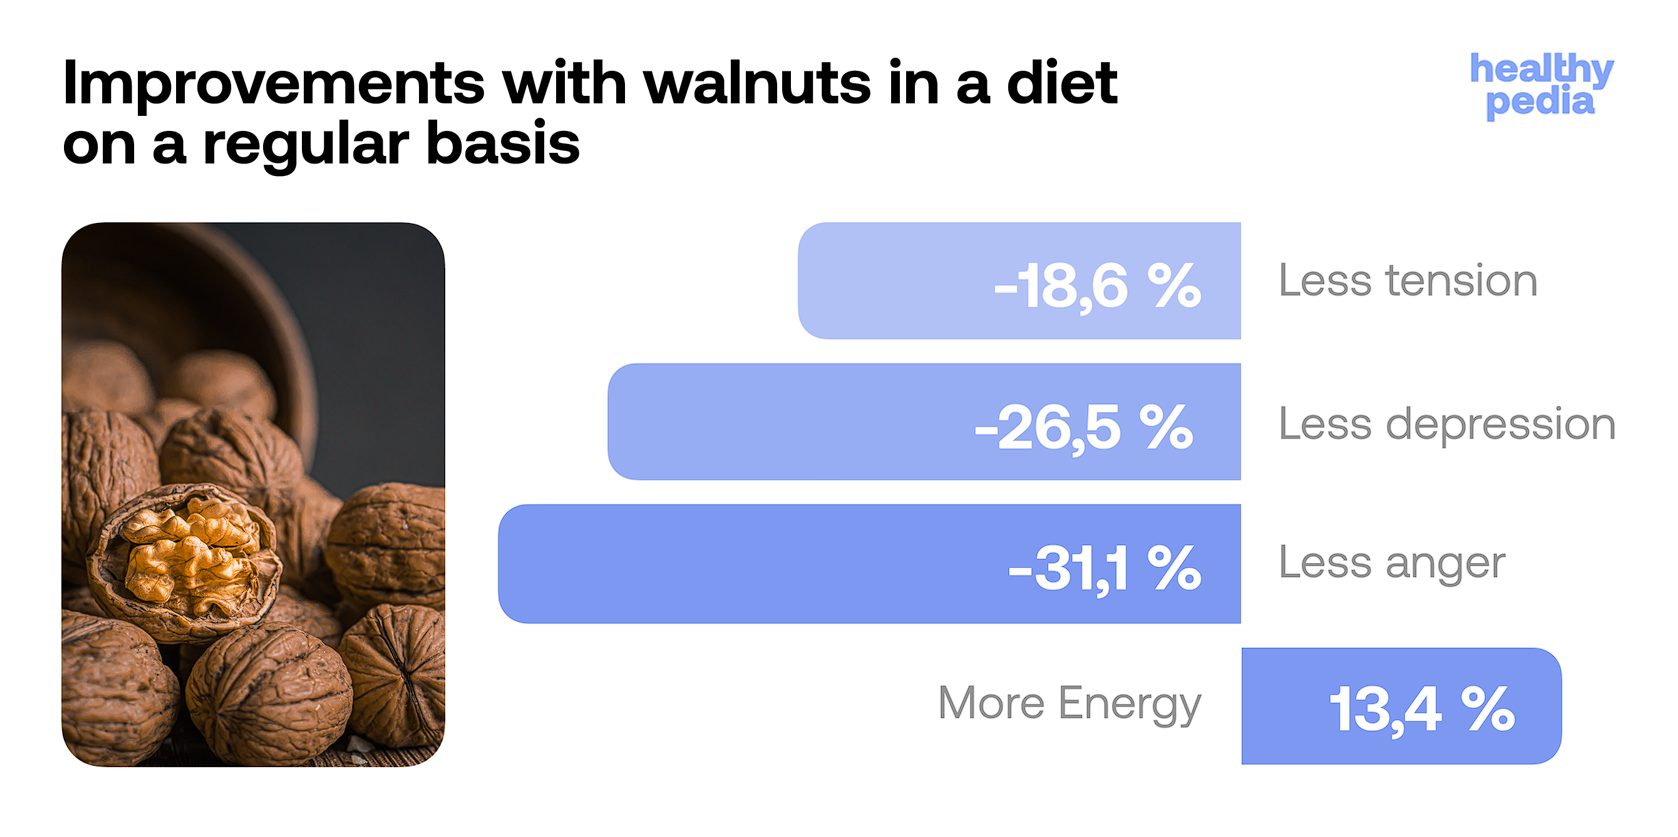 Improvements with walnuts in a diet on regular basis, stats